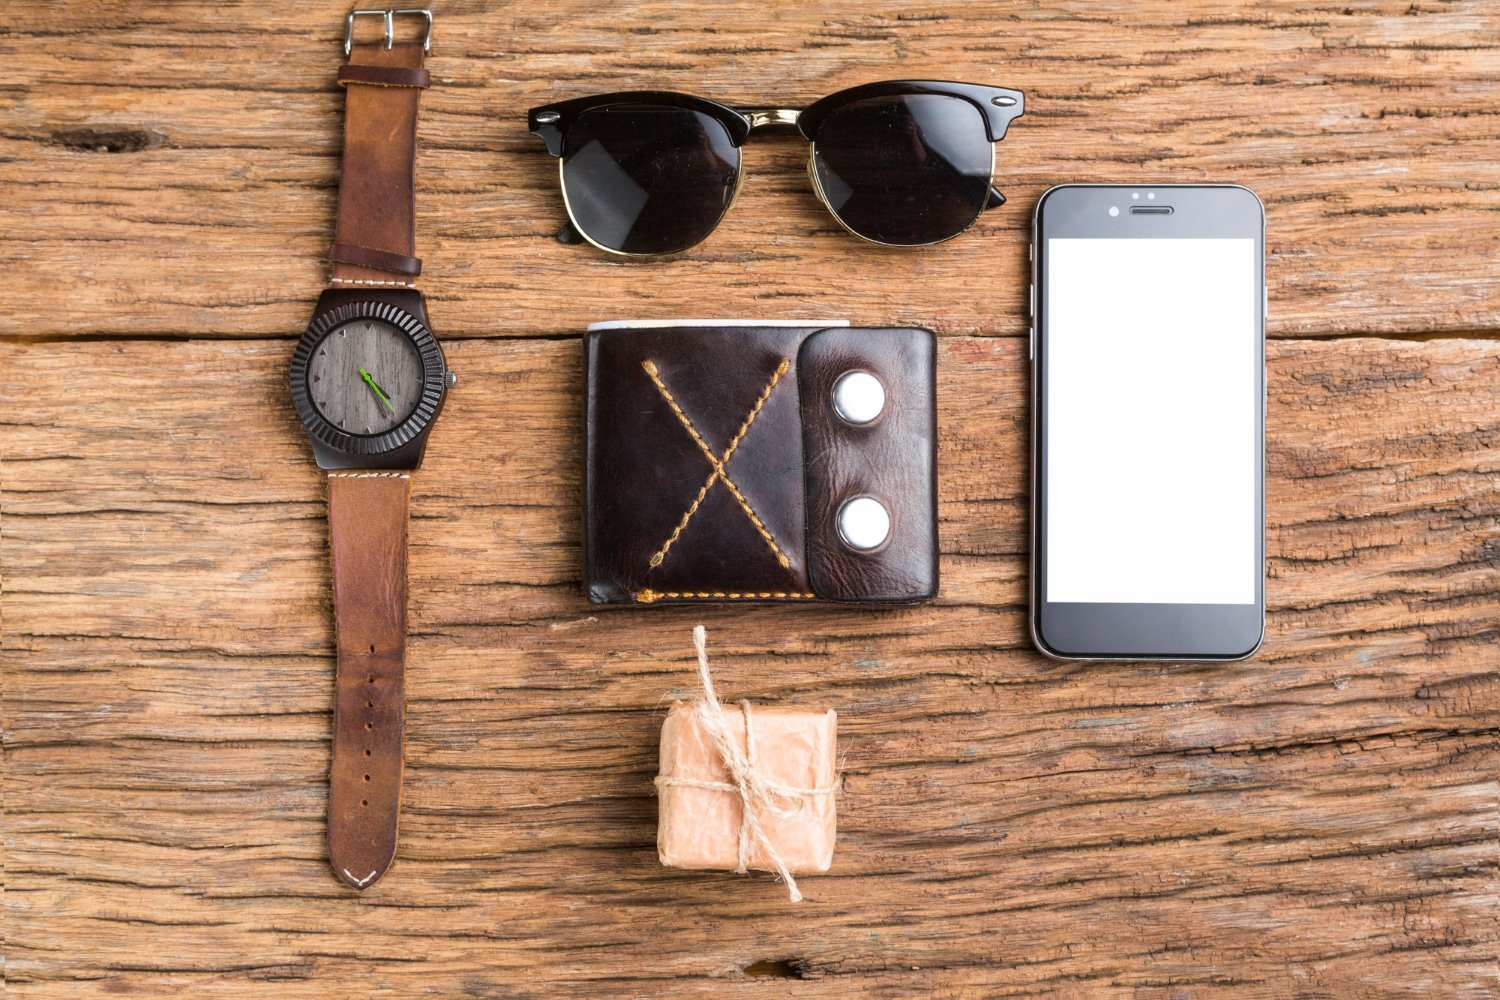 Explore Stylish And Functional Accessories With Kapten & Son DE’s Watches And Bags